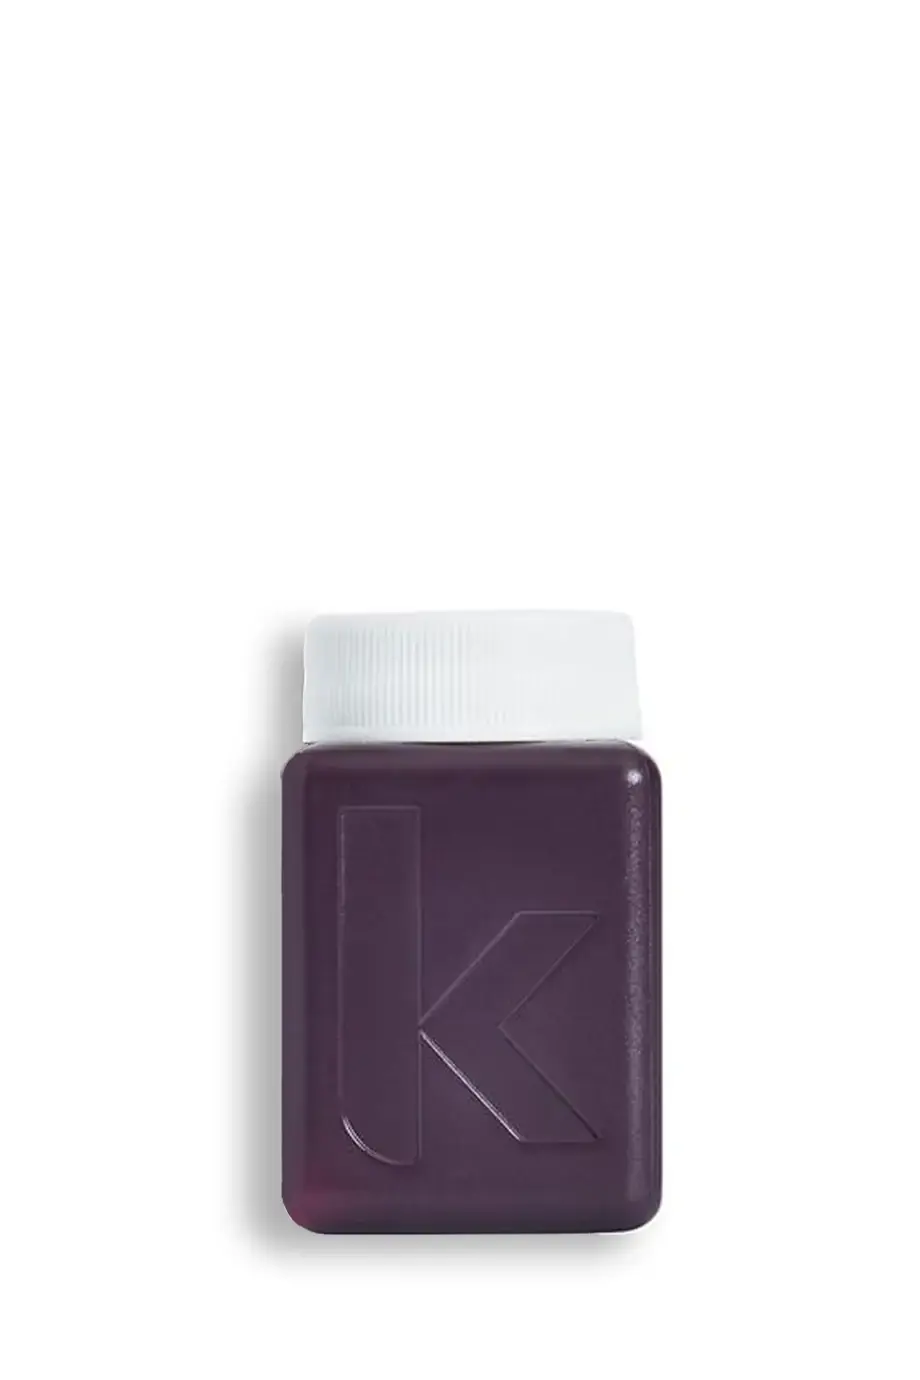 KEVIN.MURPHY Young.Again.Masque